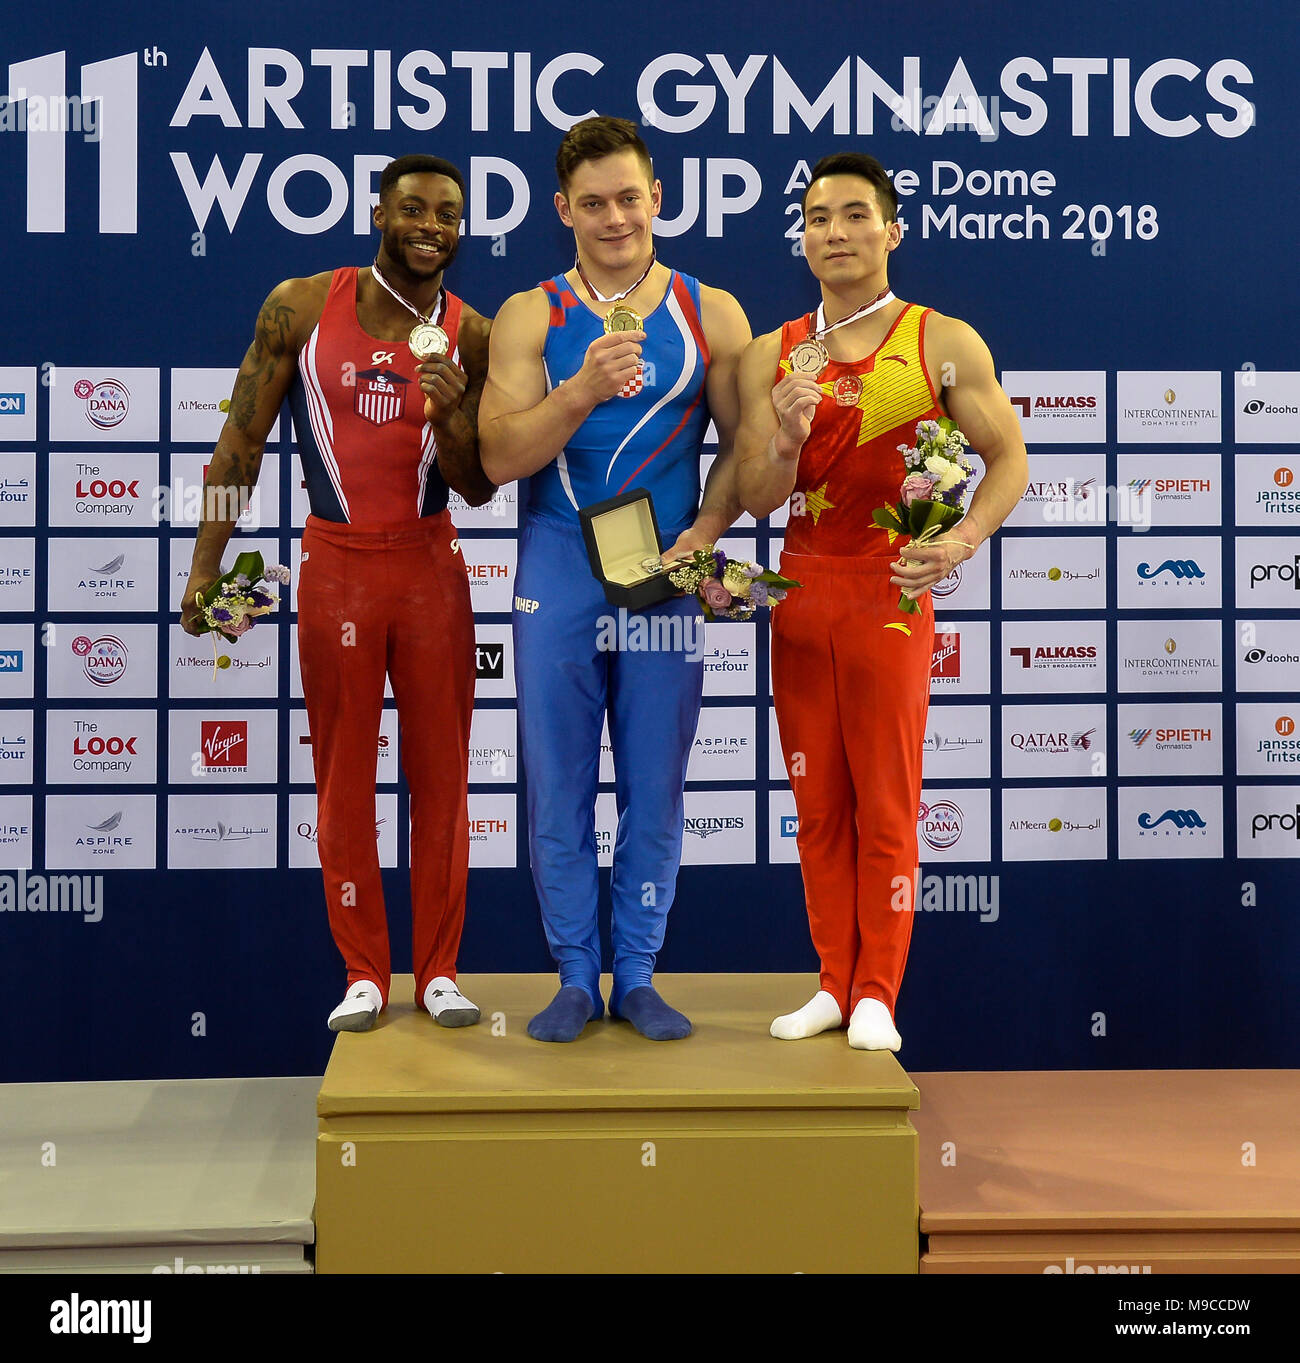 Doha, Capital of Qatar. 24th Mar, 2018. Gold medalist Tin Srbic (C) of Croatia, silver medalist Marvin Kimble (L) of the United States and bronze medalist Deng Shudi of China pose during the awarding ceremony for the Men's Horizontal Bar final at the 11th FIG Artistic Gymnastics Individual Apparatus World Cup in Doha, Capital of Qatar, on March 24, 2018. Credit: Nikku/Xinhua/Alamy Live News Stock Photo